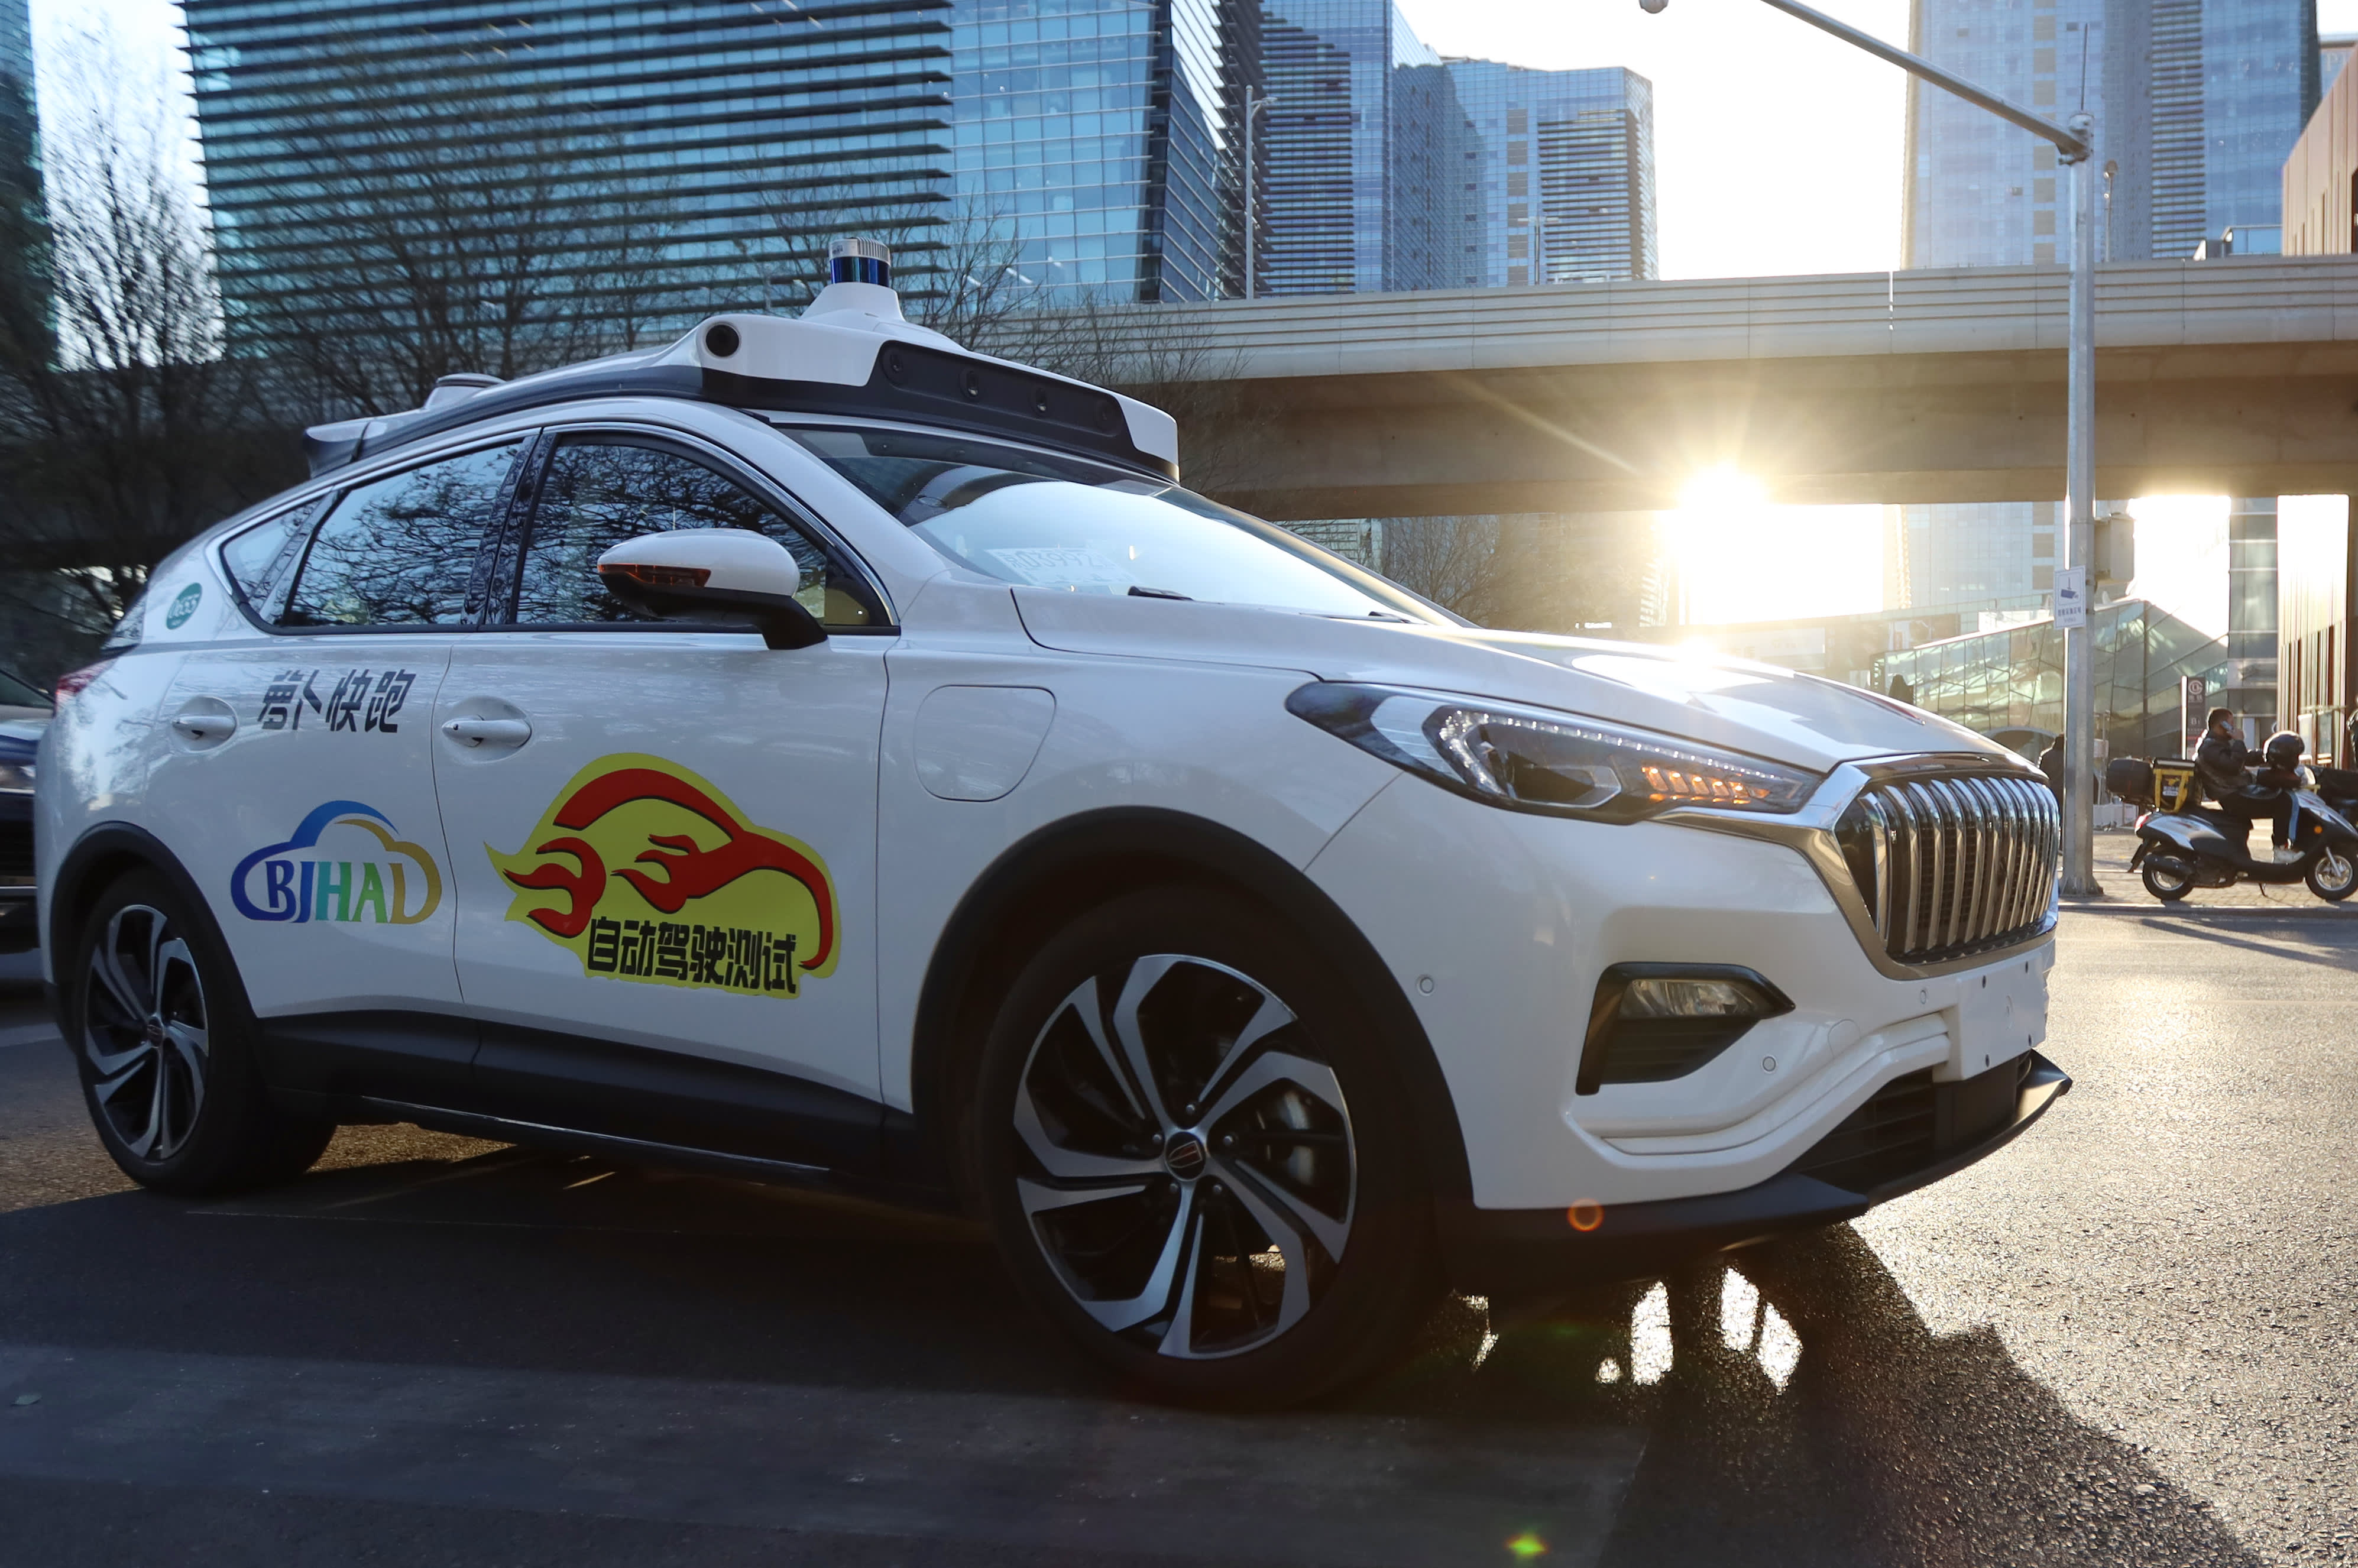 UBS says self-driving cars could become a $100bn market in China - and names stocks to play it